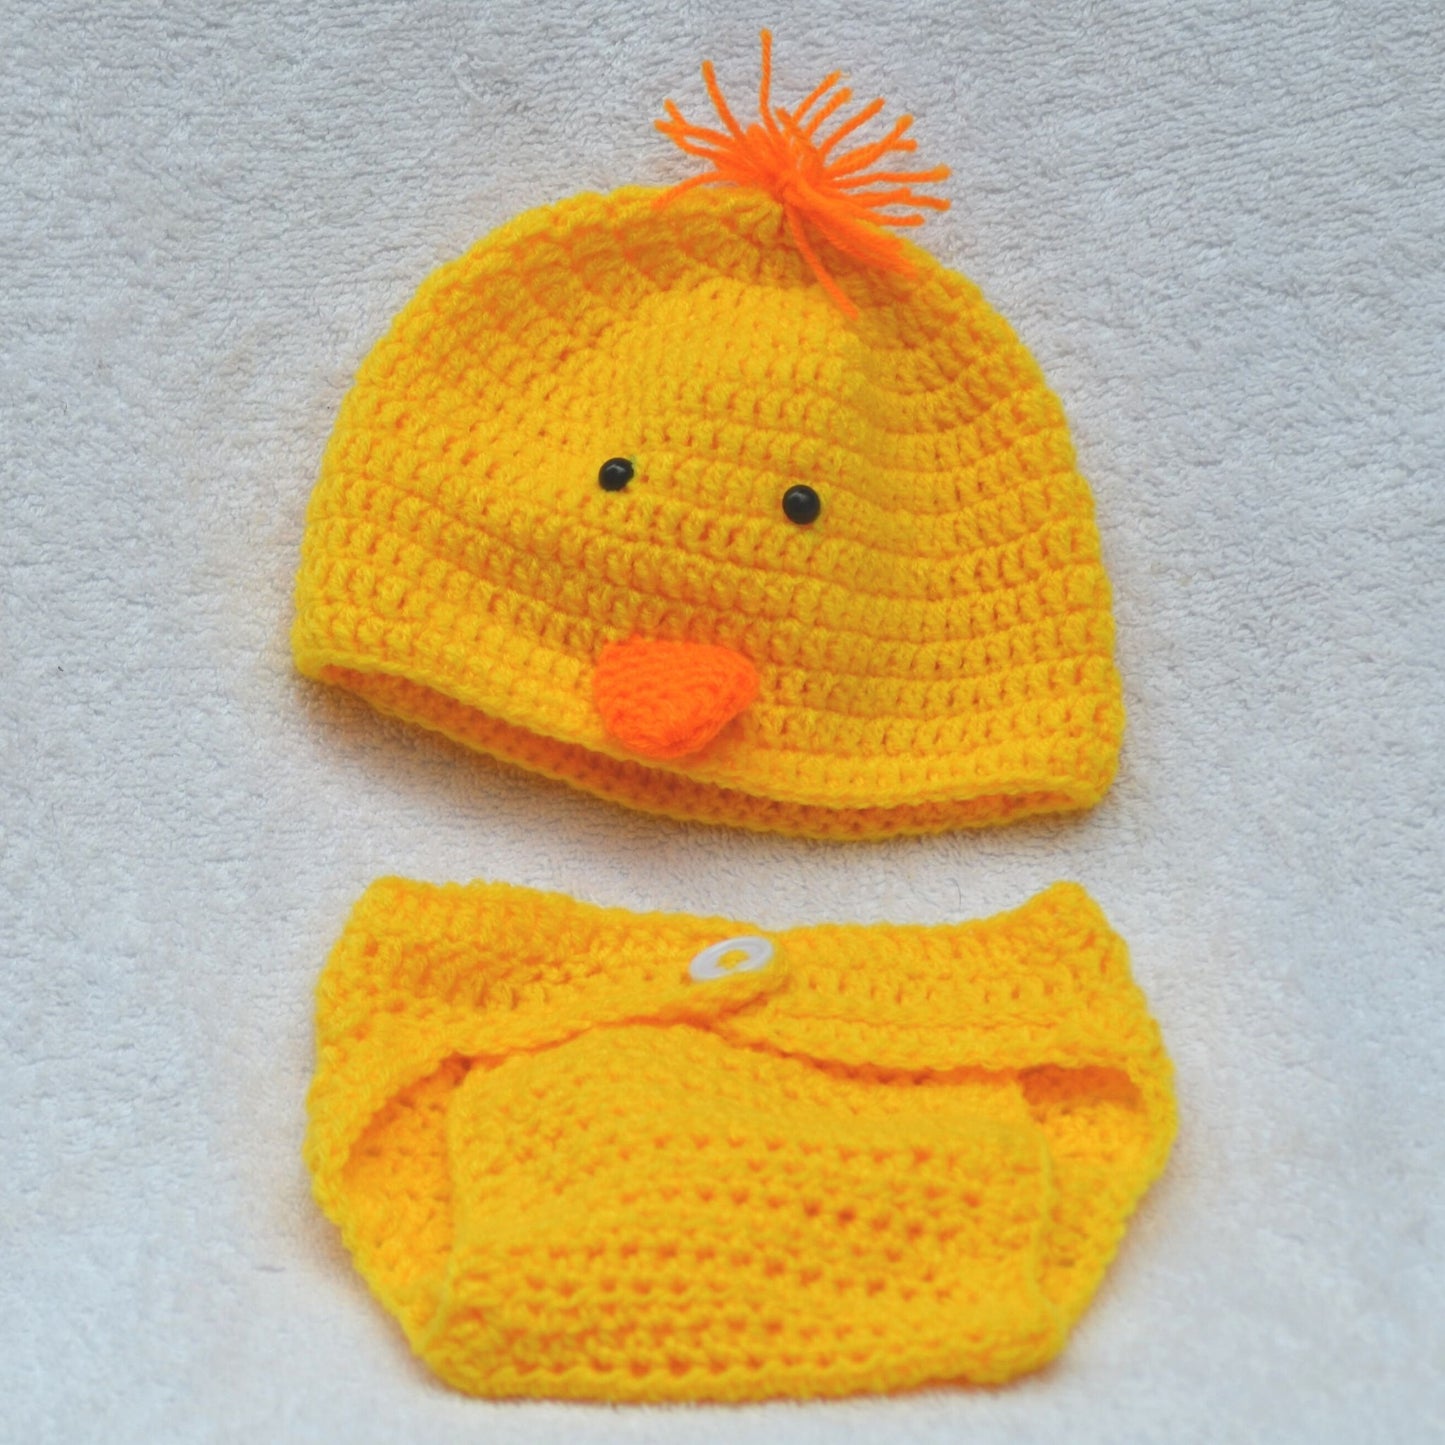 Crochet Baby Animal Hats 0 to 3 month size